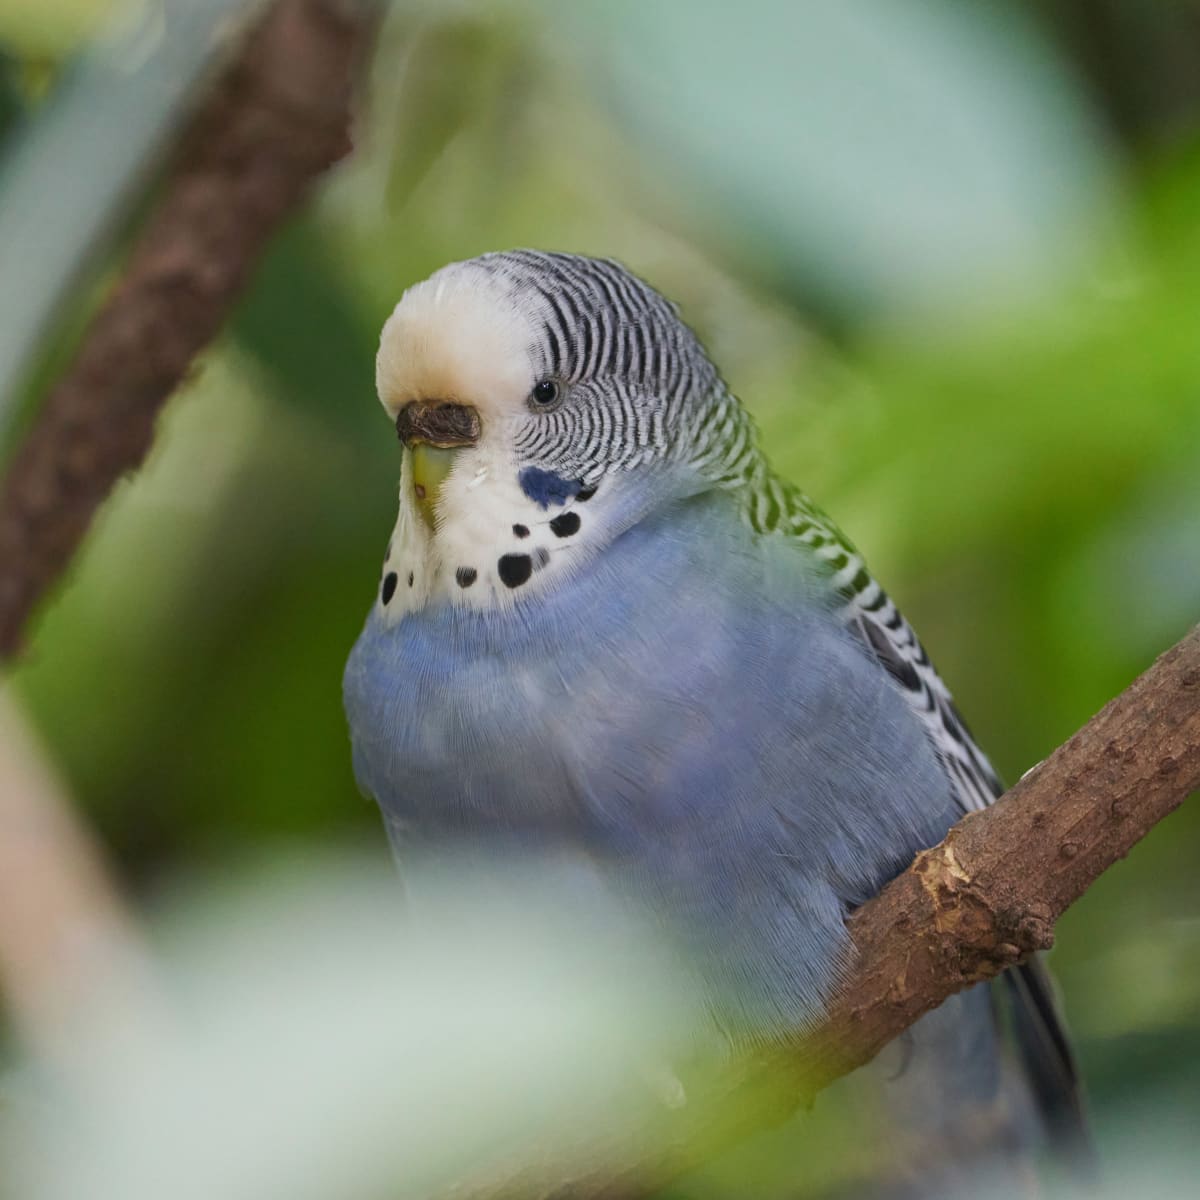 Is My Budgie a Boy or a Girl? (Photo Identification Guide) pic